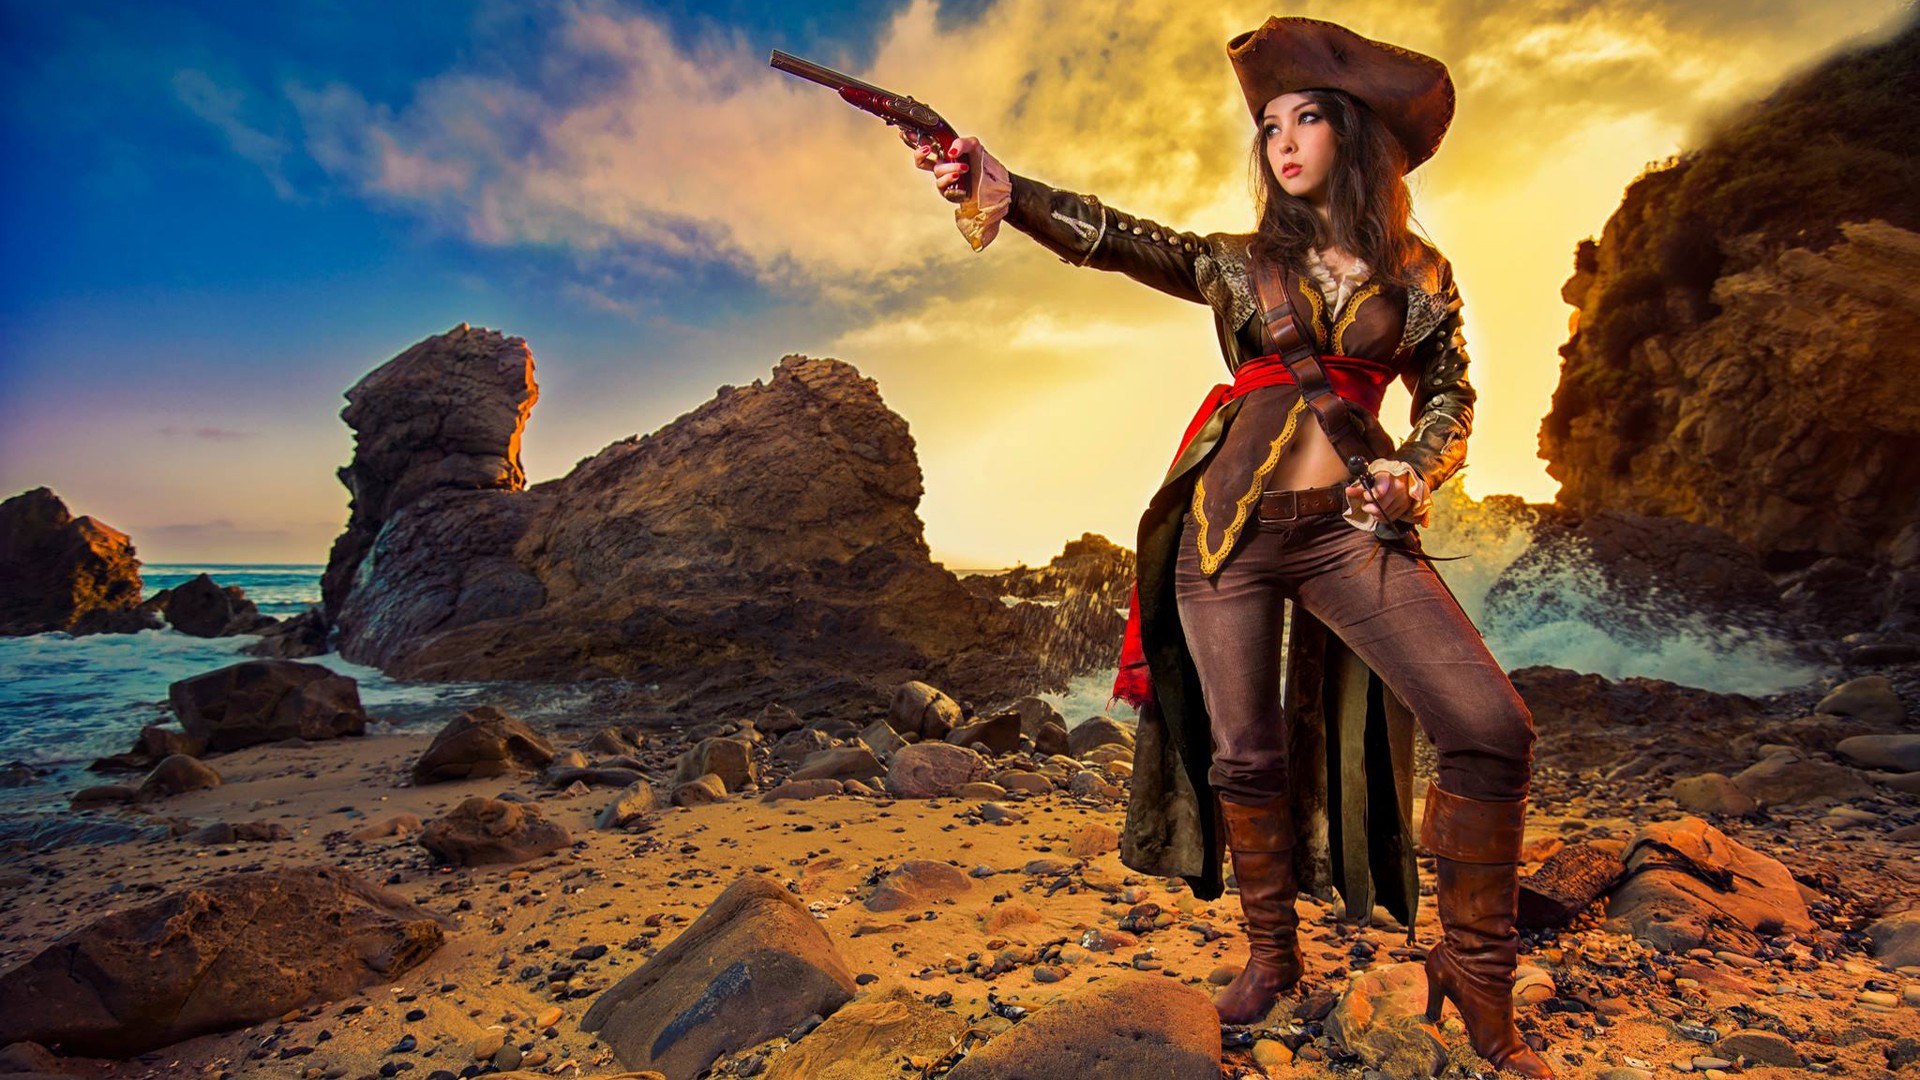 People 1920x1080 Monika Lee Assassin's Creed cosplay video game girls gun pirates women model standing elly heels boots makeup hat women with hats pirate hat